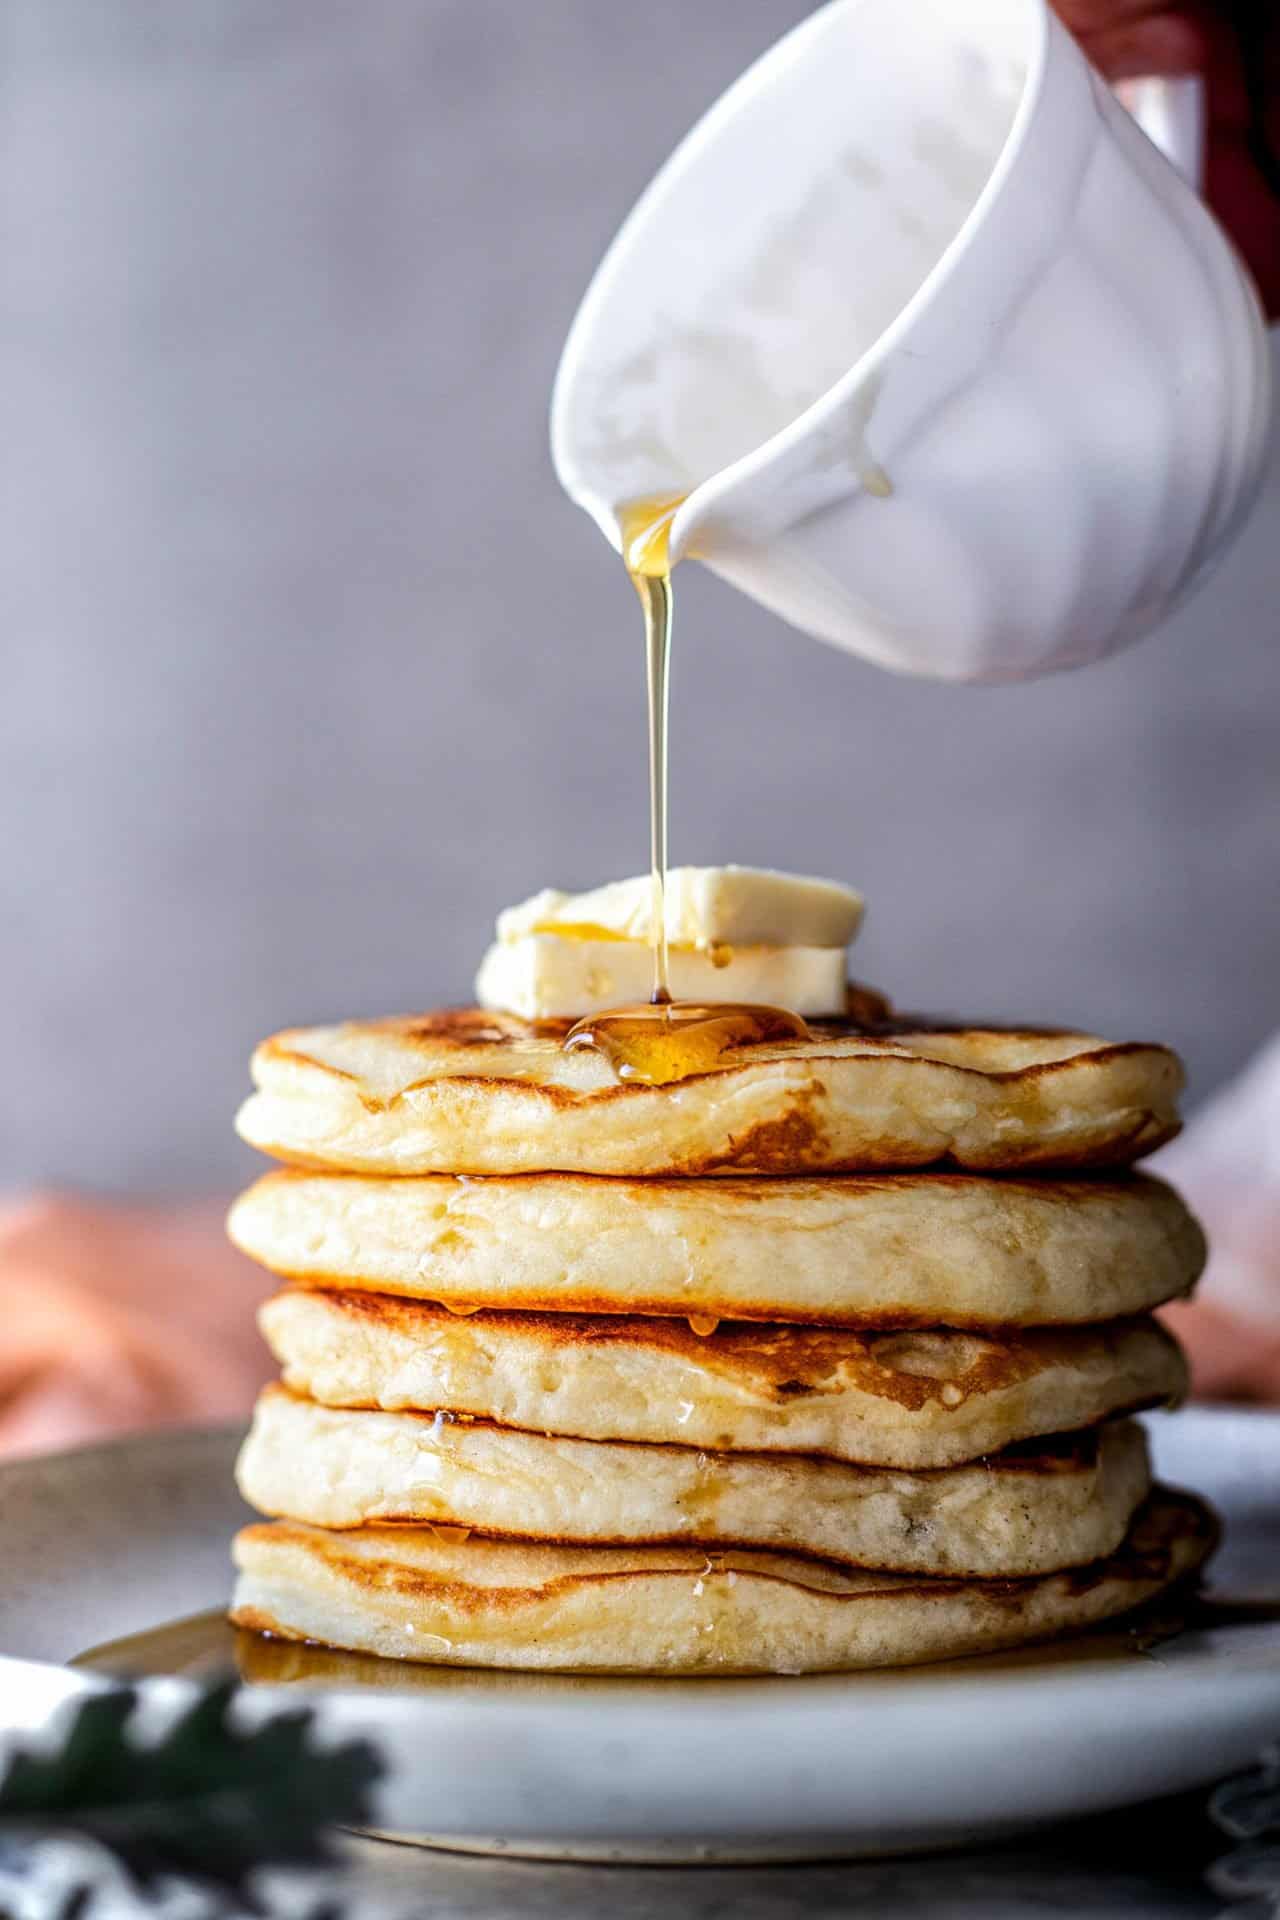 These Gluten-Free American Pancakes are buttery, soft, fluffy, super simple and easy to make, FODMAP friendly and just so good!
